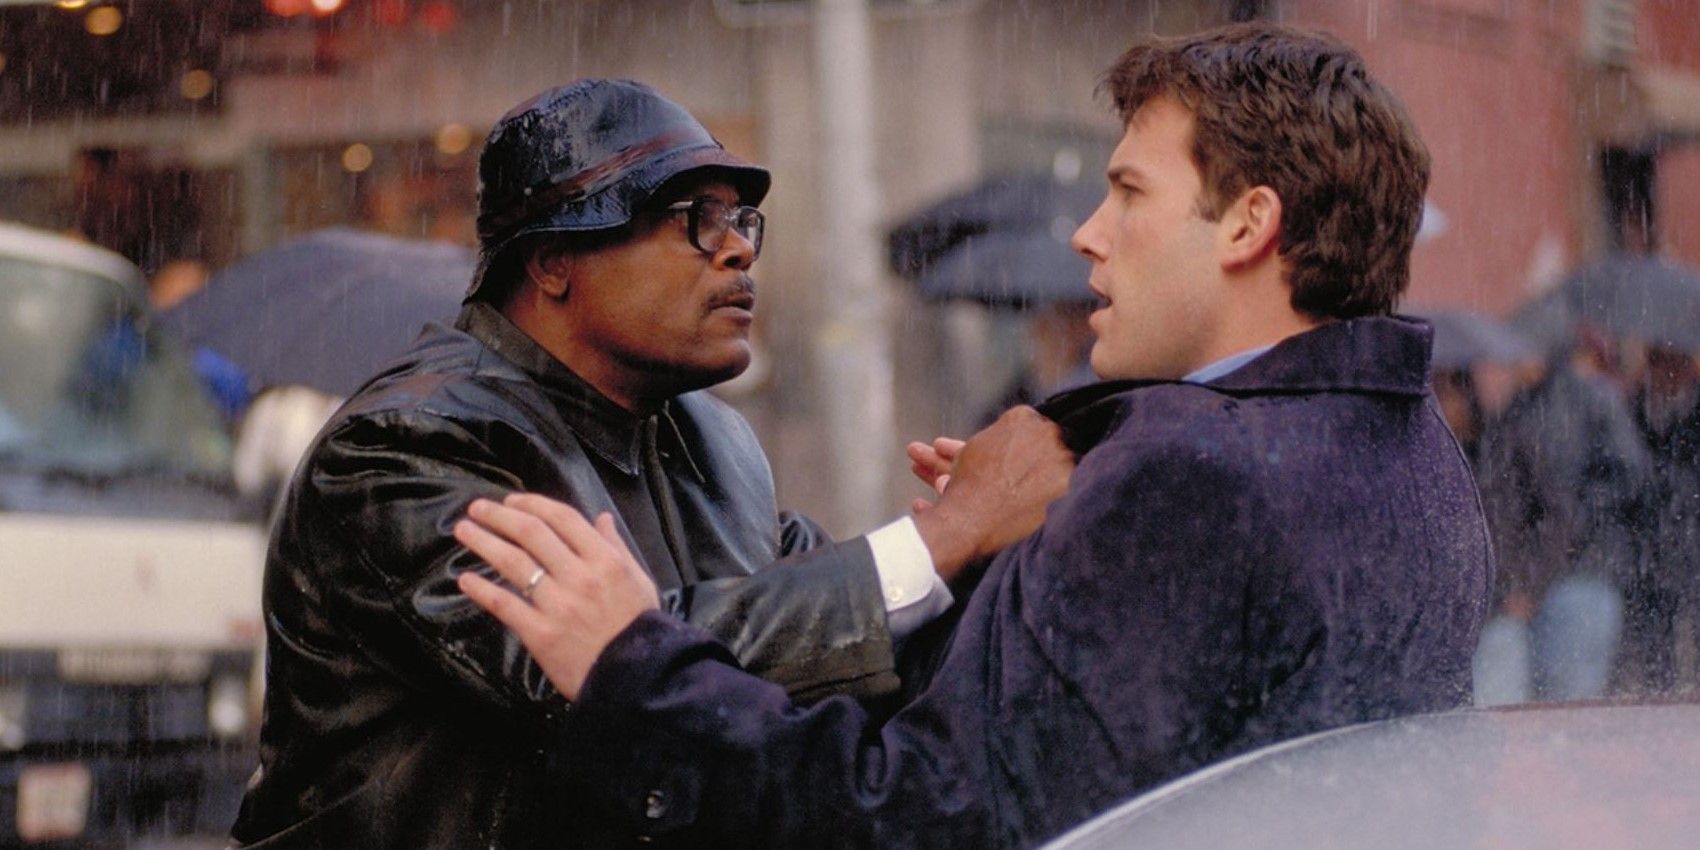 Samuel L Jackson grabs Ben Affleck by the coat in traffic in Changing Lanes